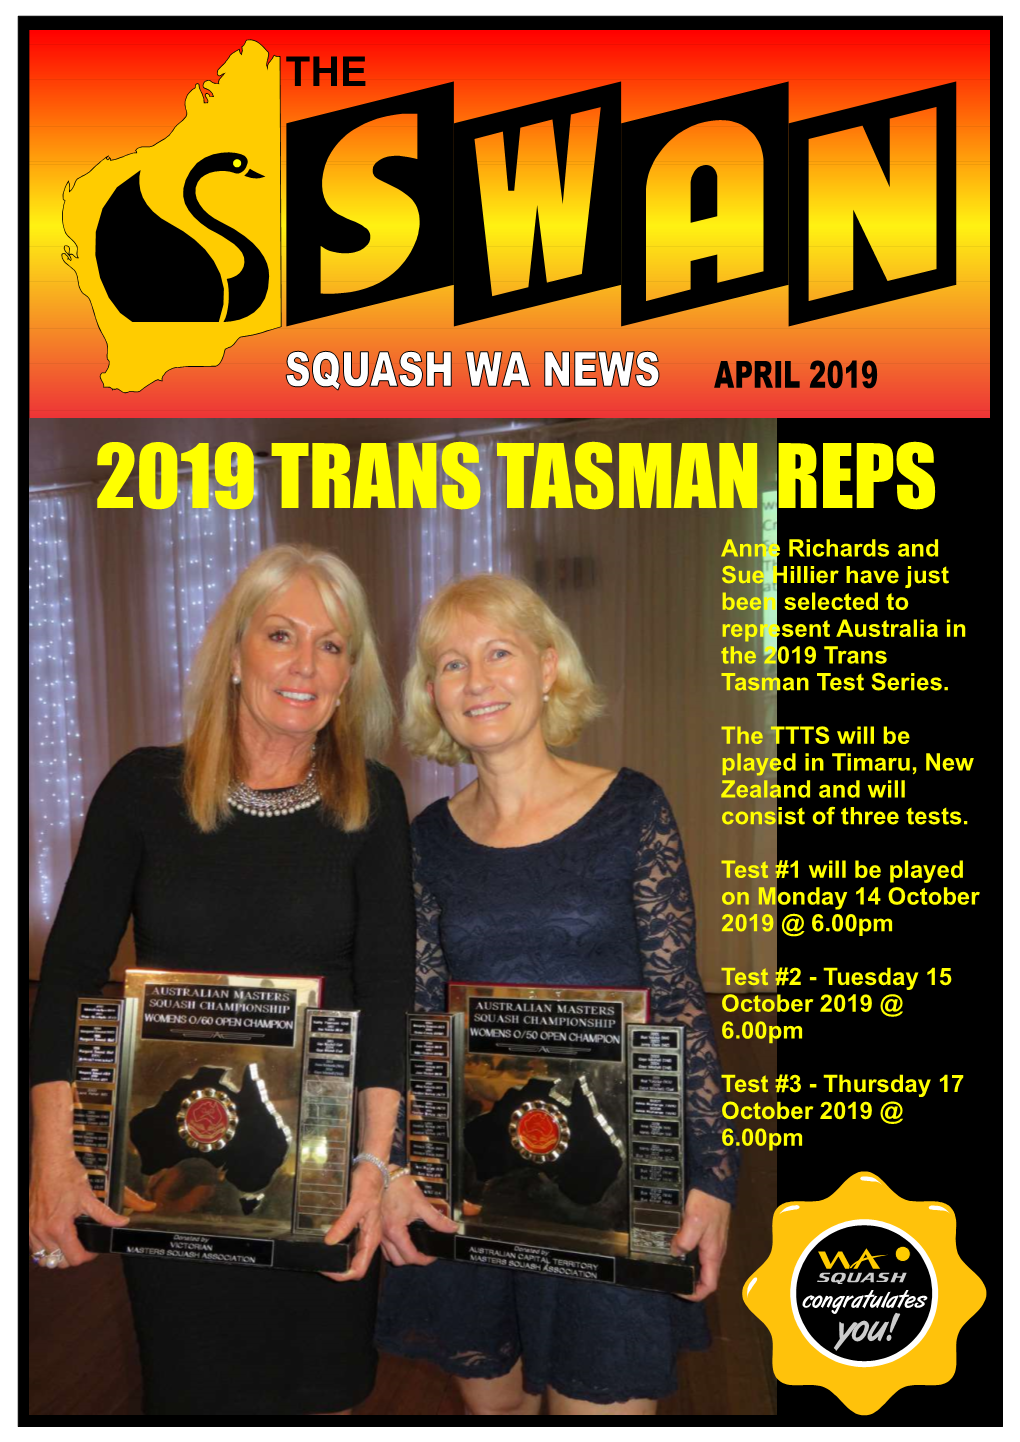 2019 TRANS TASMAN REPS Anne Richards and Sue Hillier Have Just Been Selected to Represent Australia in the 2019 Trans Tasman Test Series